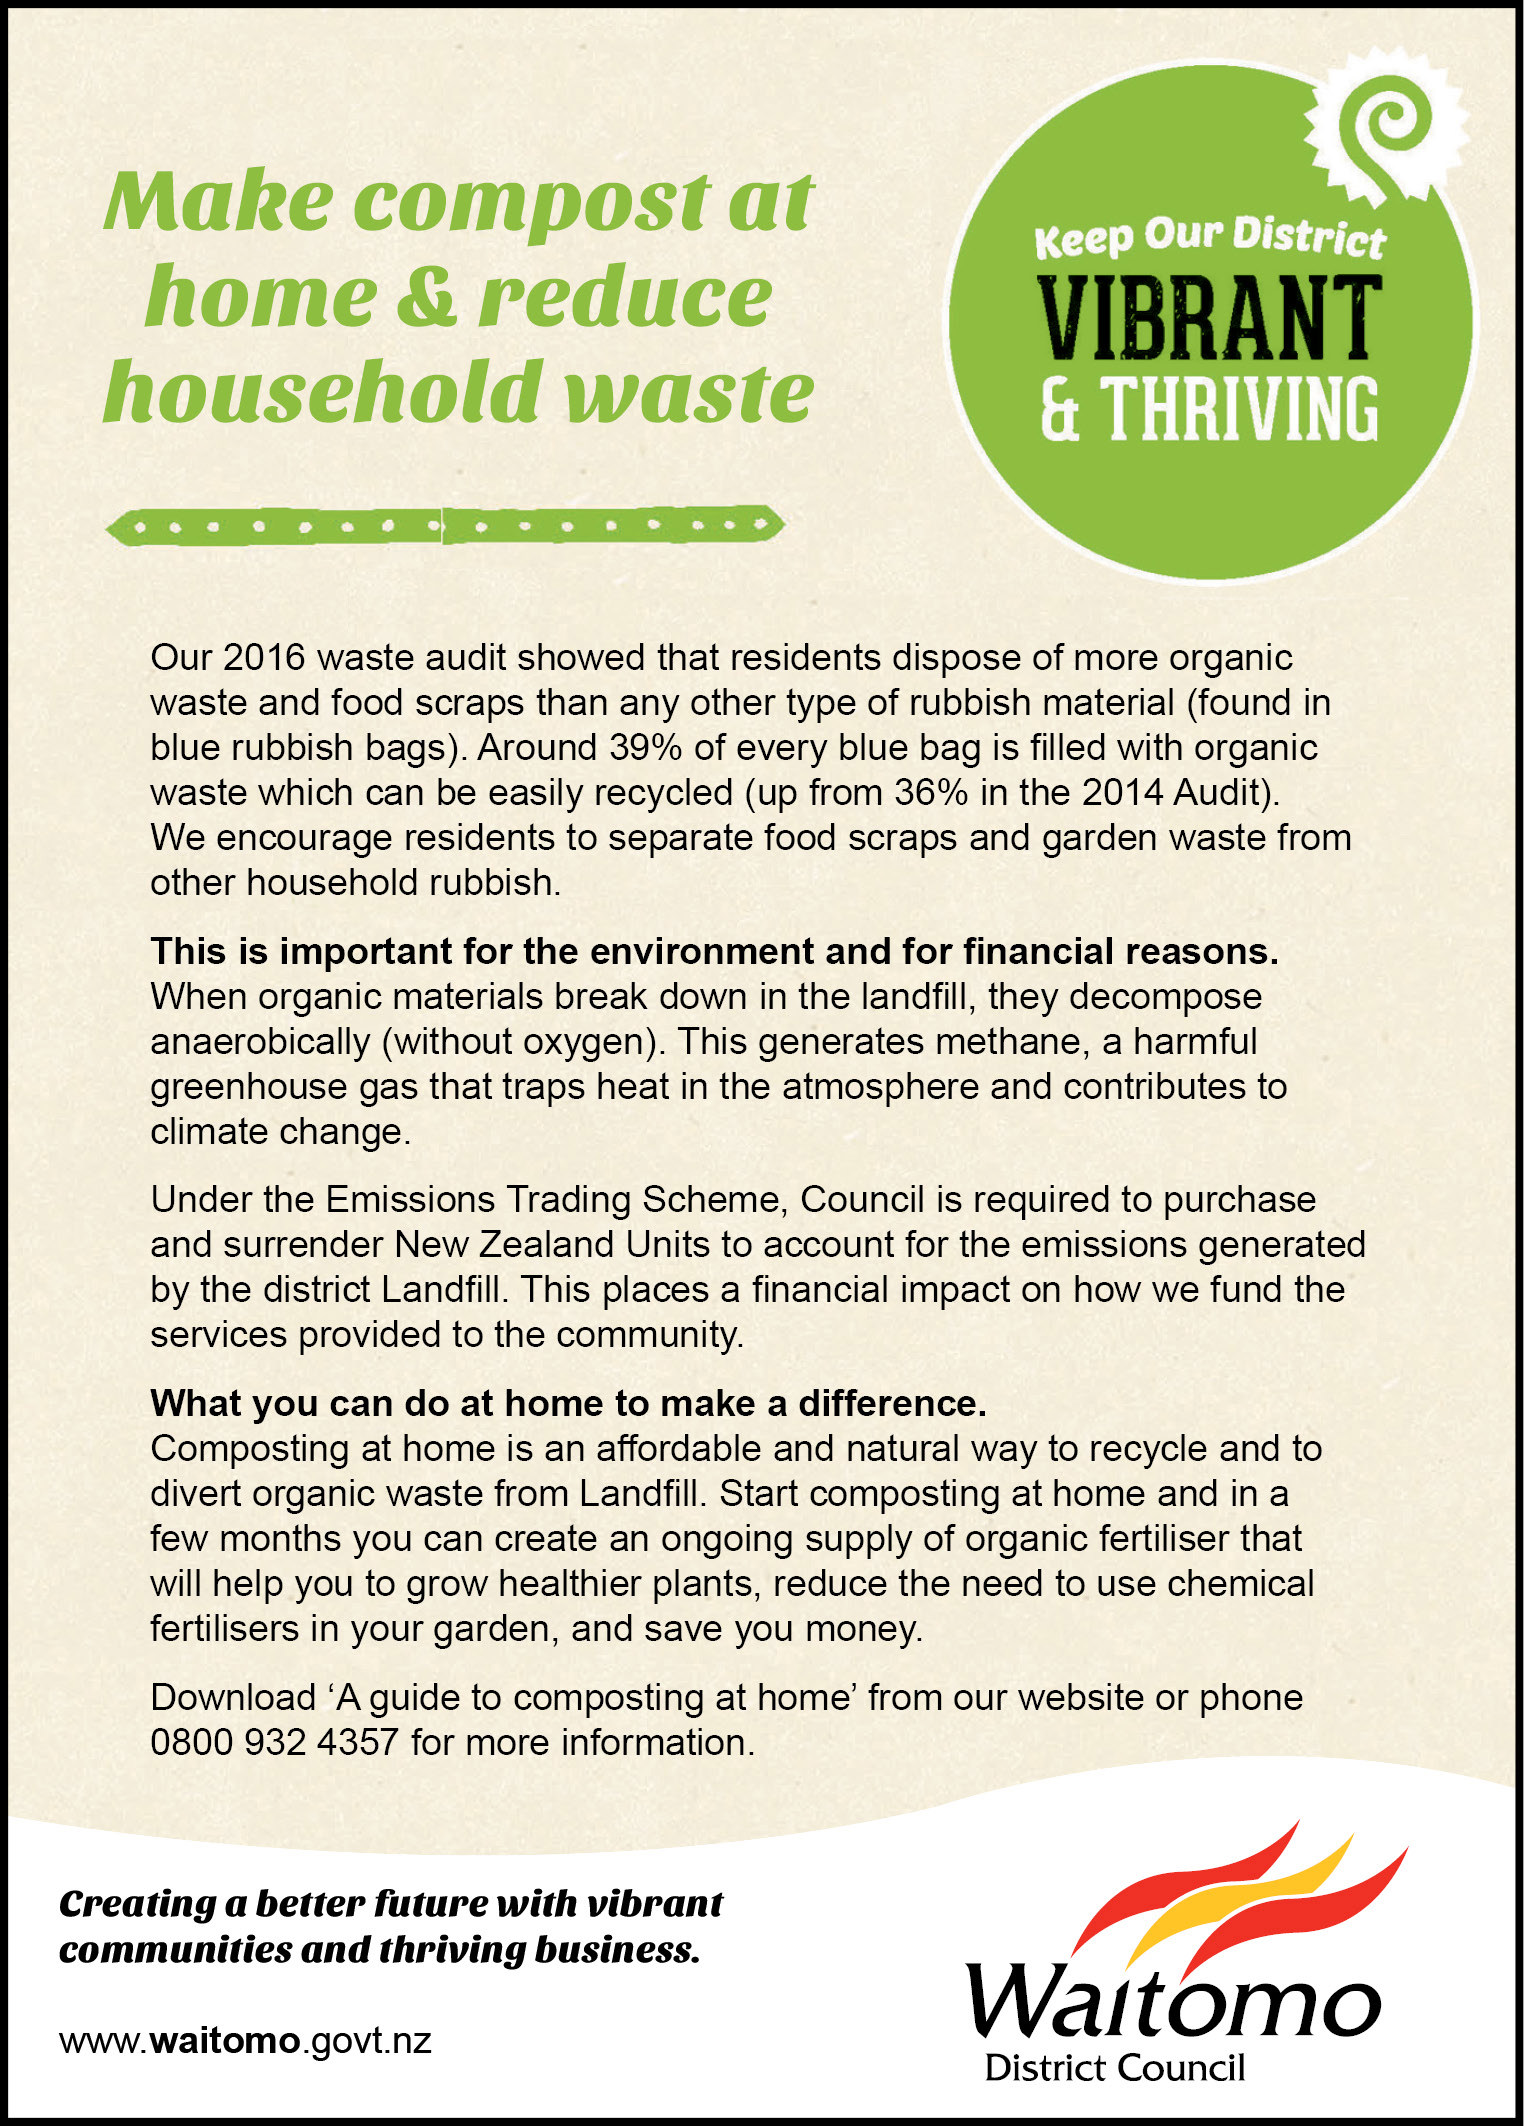 Keep our District Vibrant and Thriving - Make compost at home